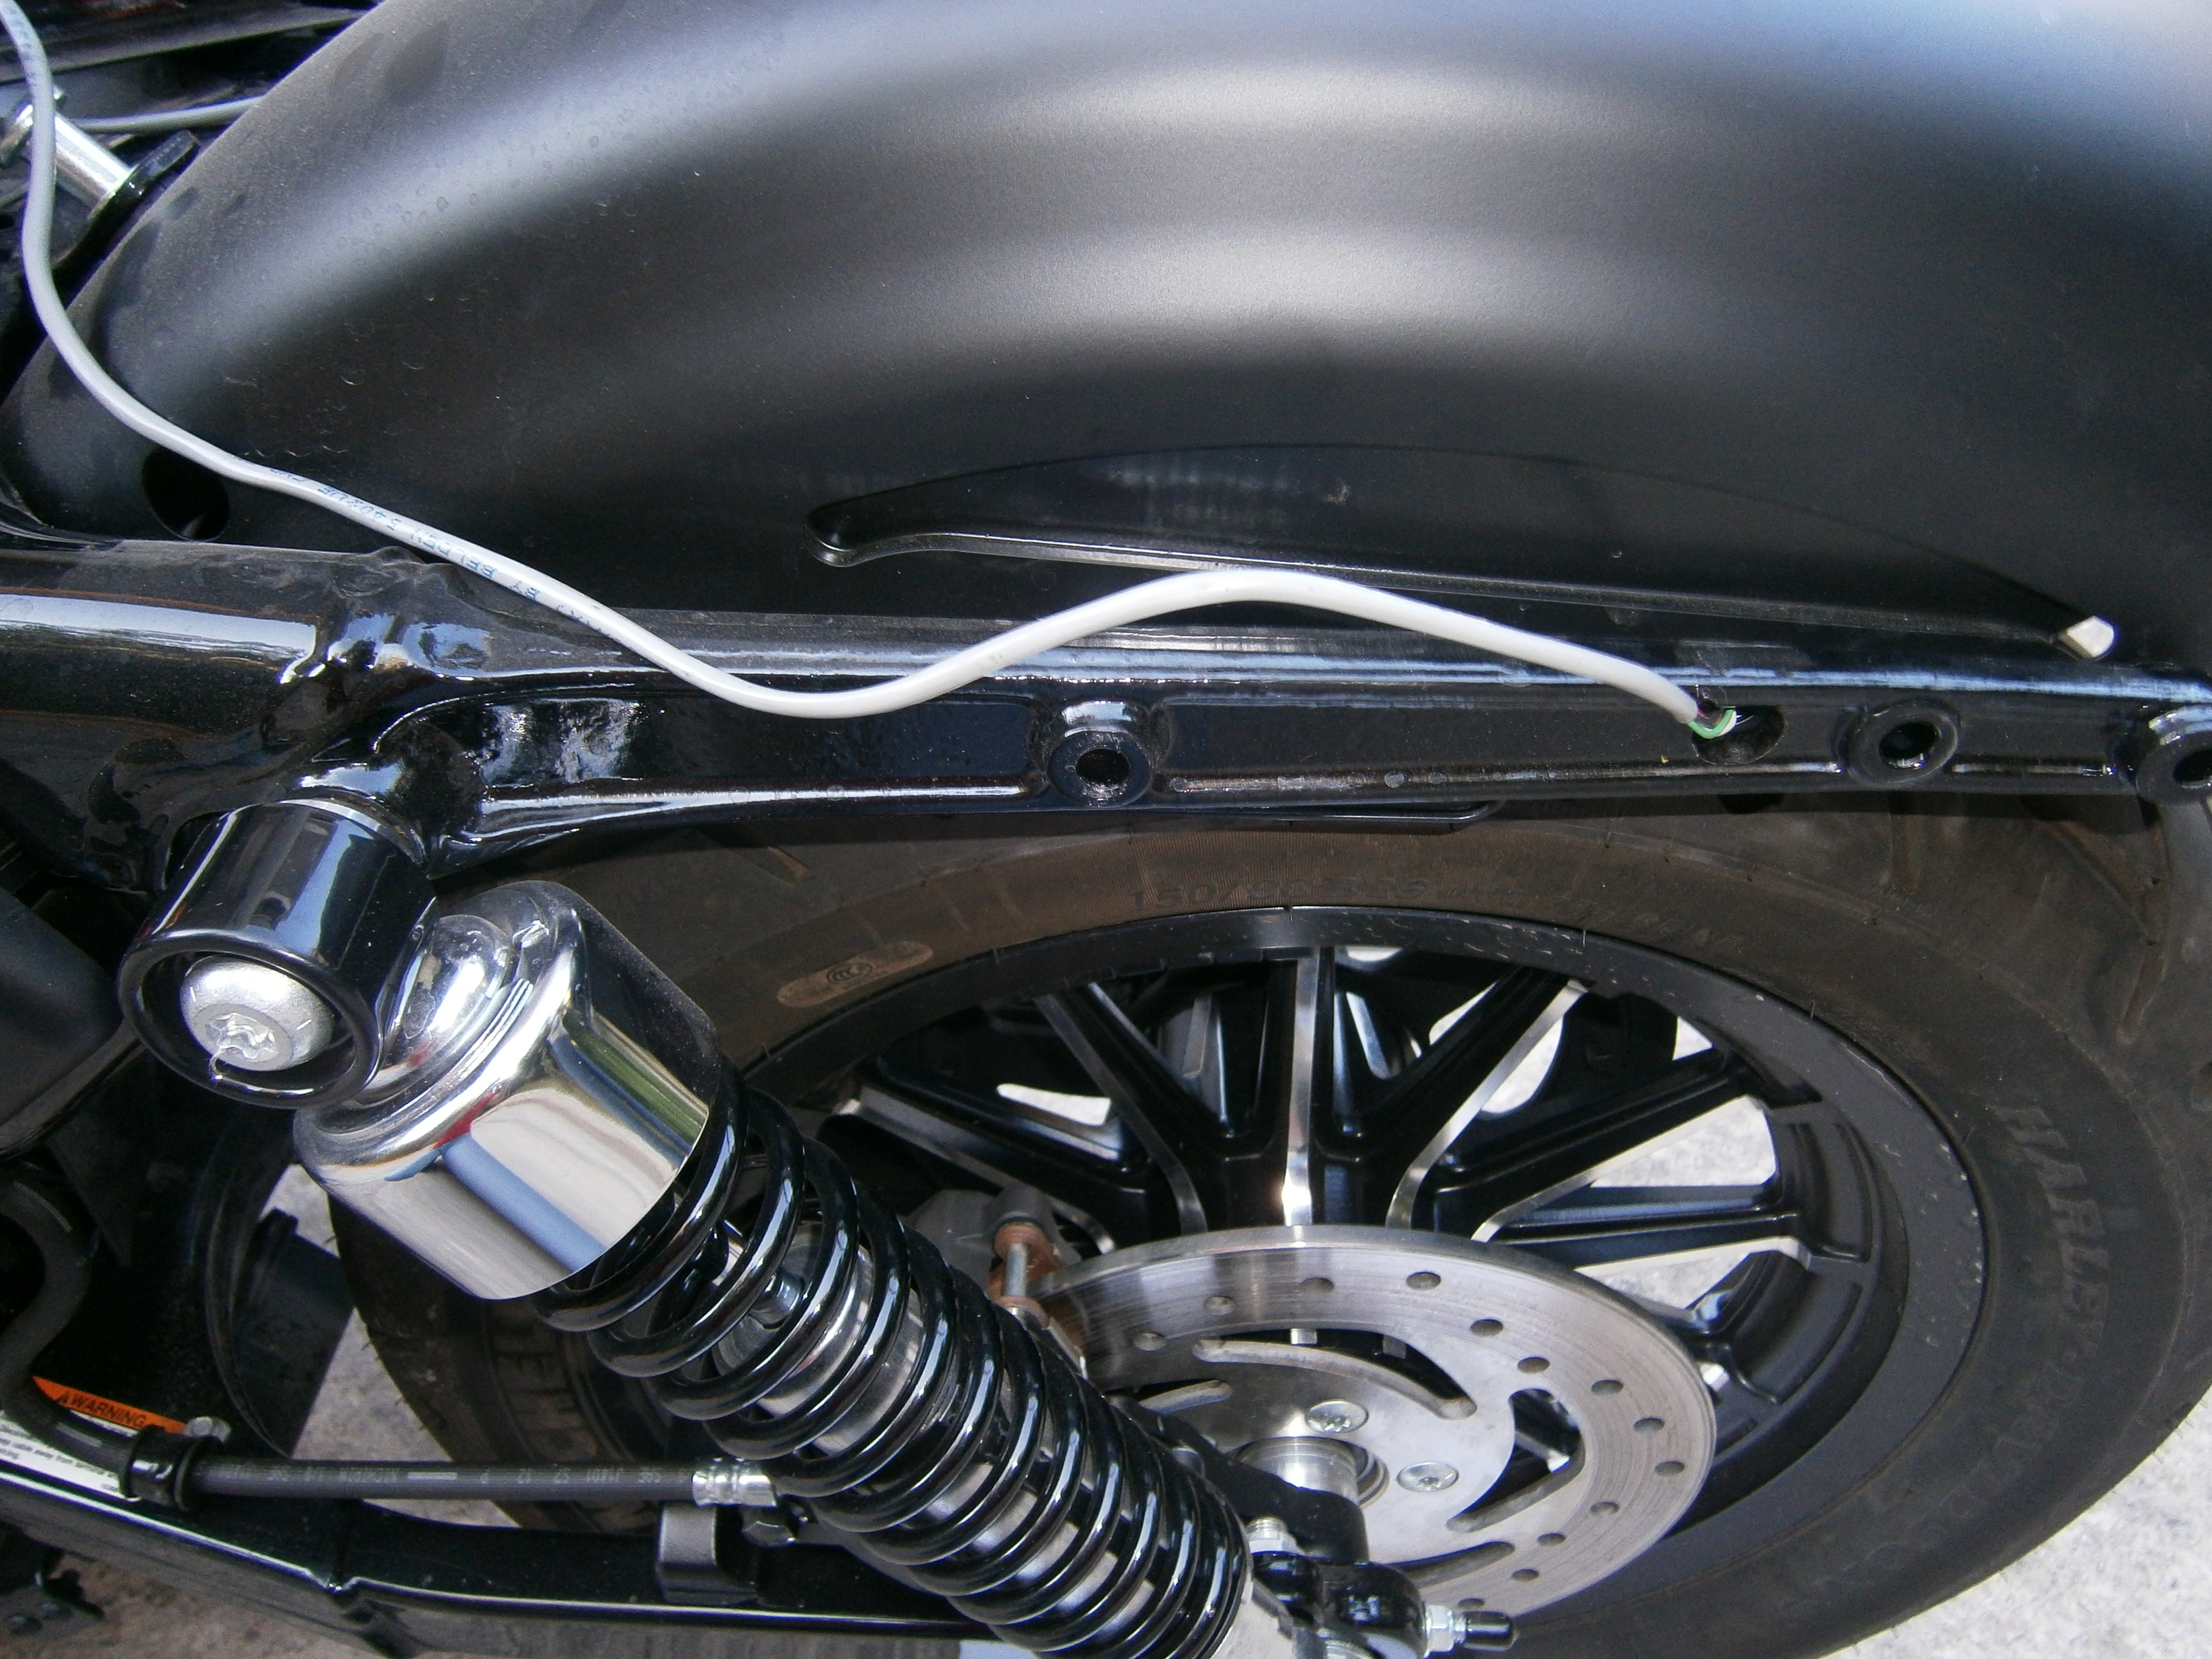 How-to: Install Side-Mount License Plate on a Harley ... motorcycle led tail light wiring diagram for harley 